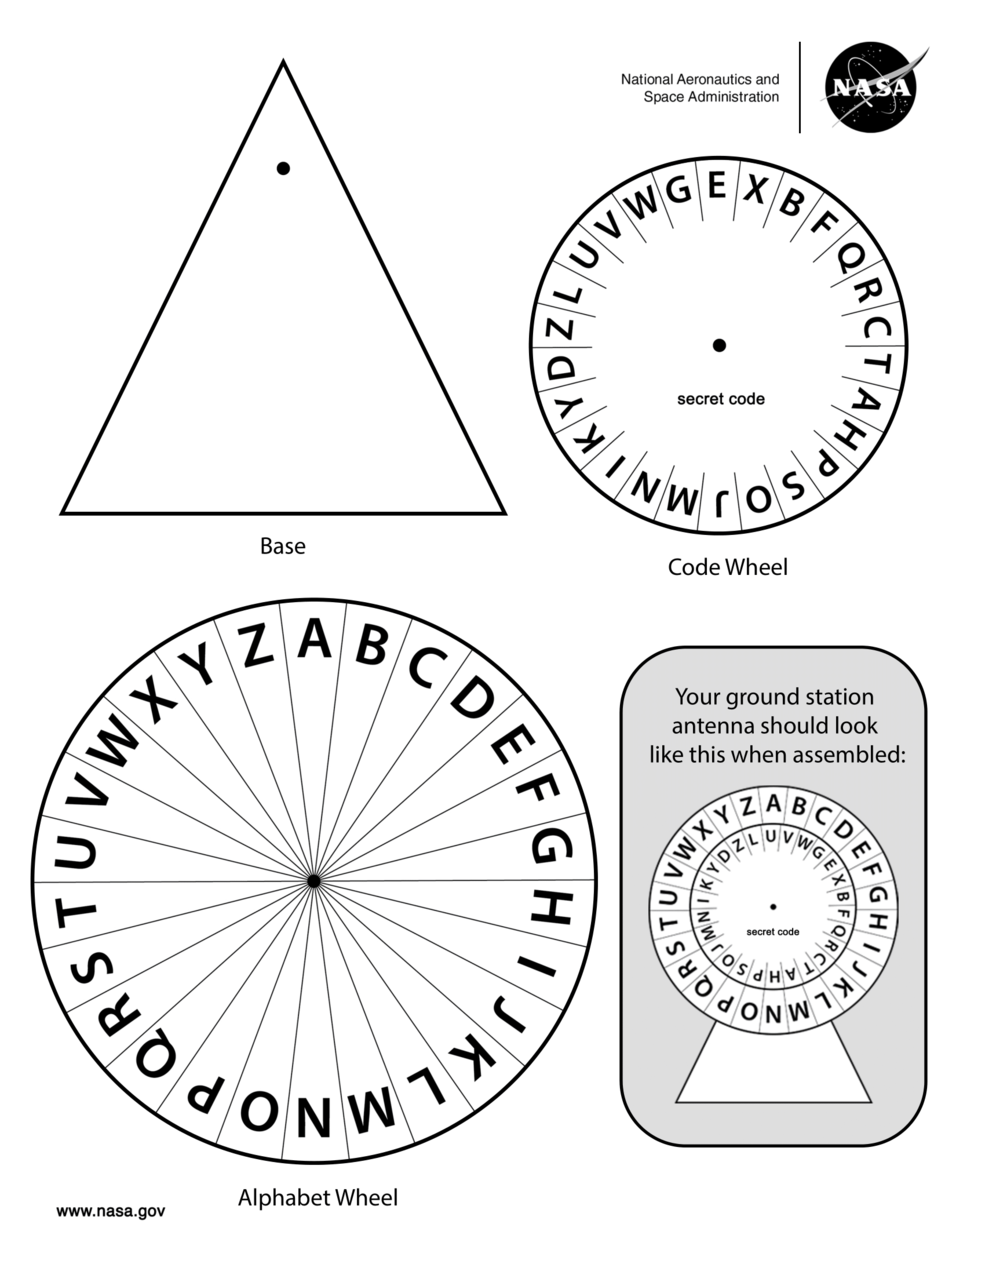 Second page of the Build Your Own Coding Activity for grades four through six. From top left to right, rotating clockwise, is a triangle, small circle, larger circle, and an image of how to assemble the pieces.